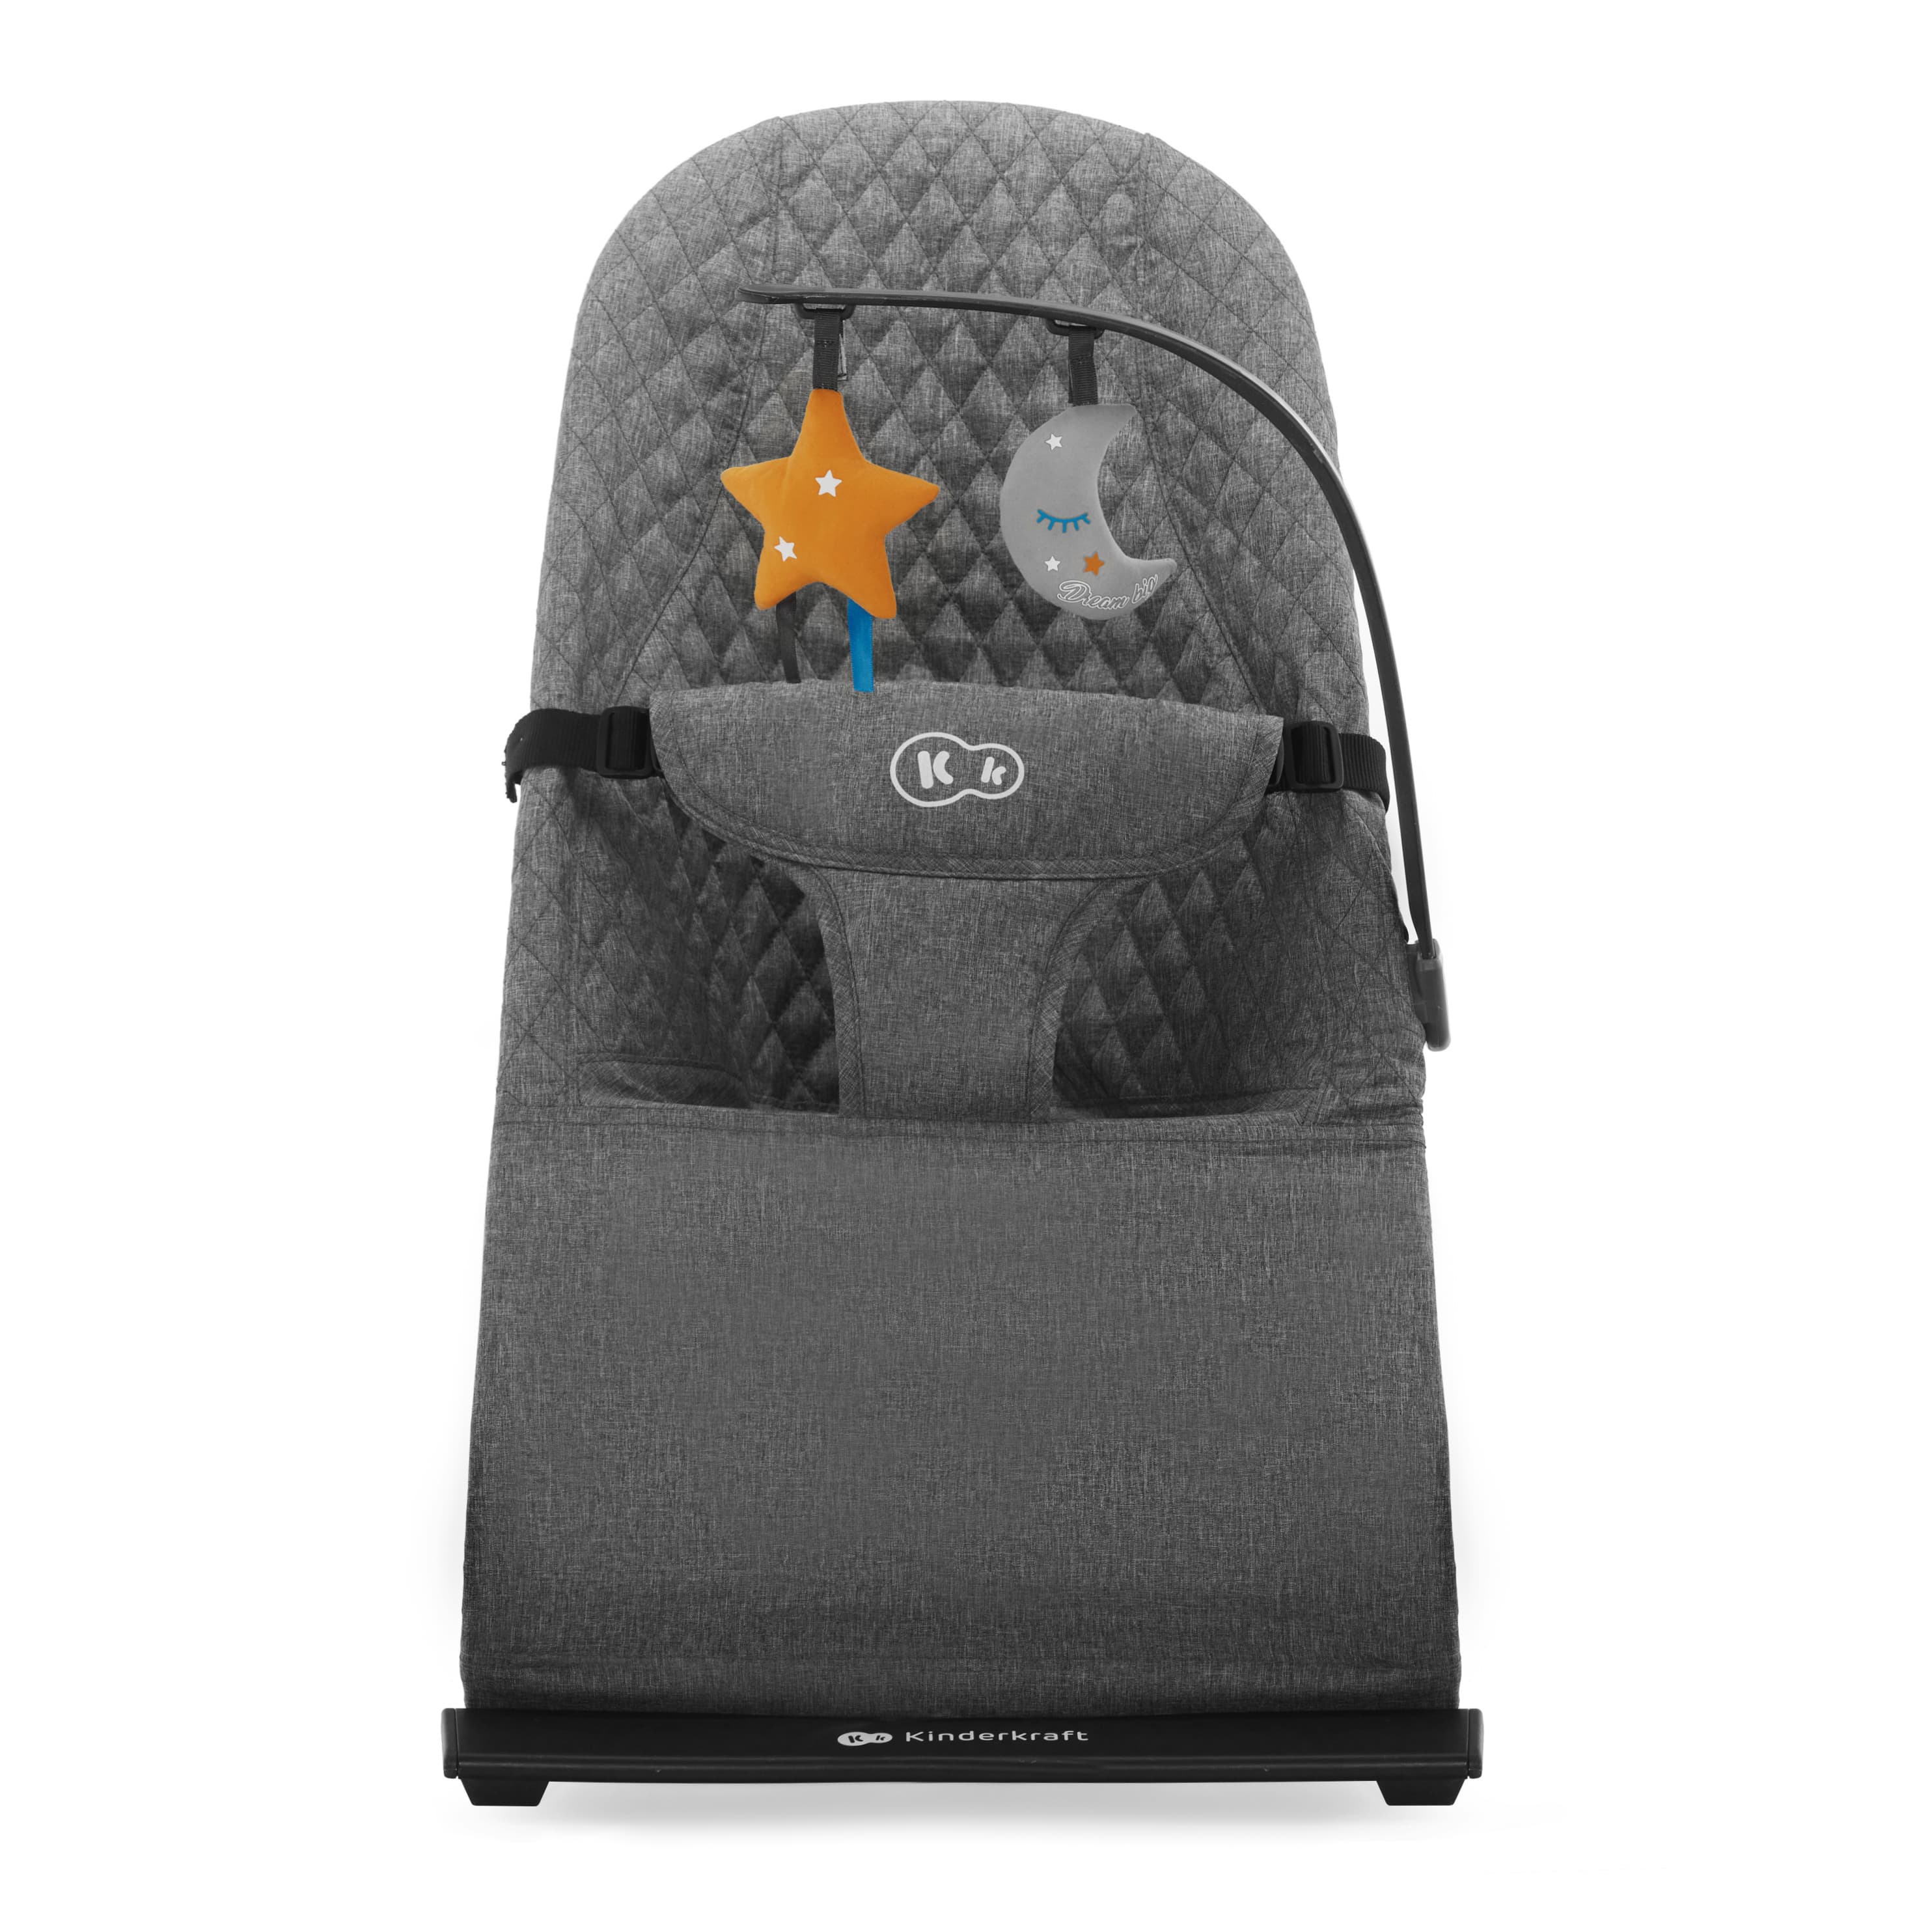 A bouncer that moves to the rhythm of your baby